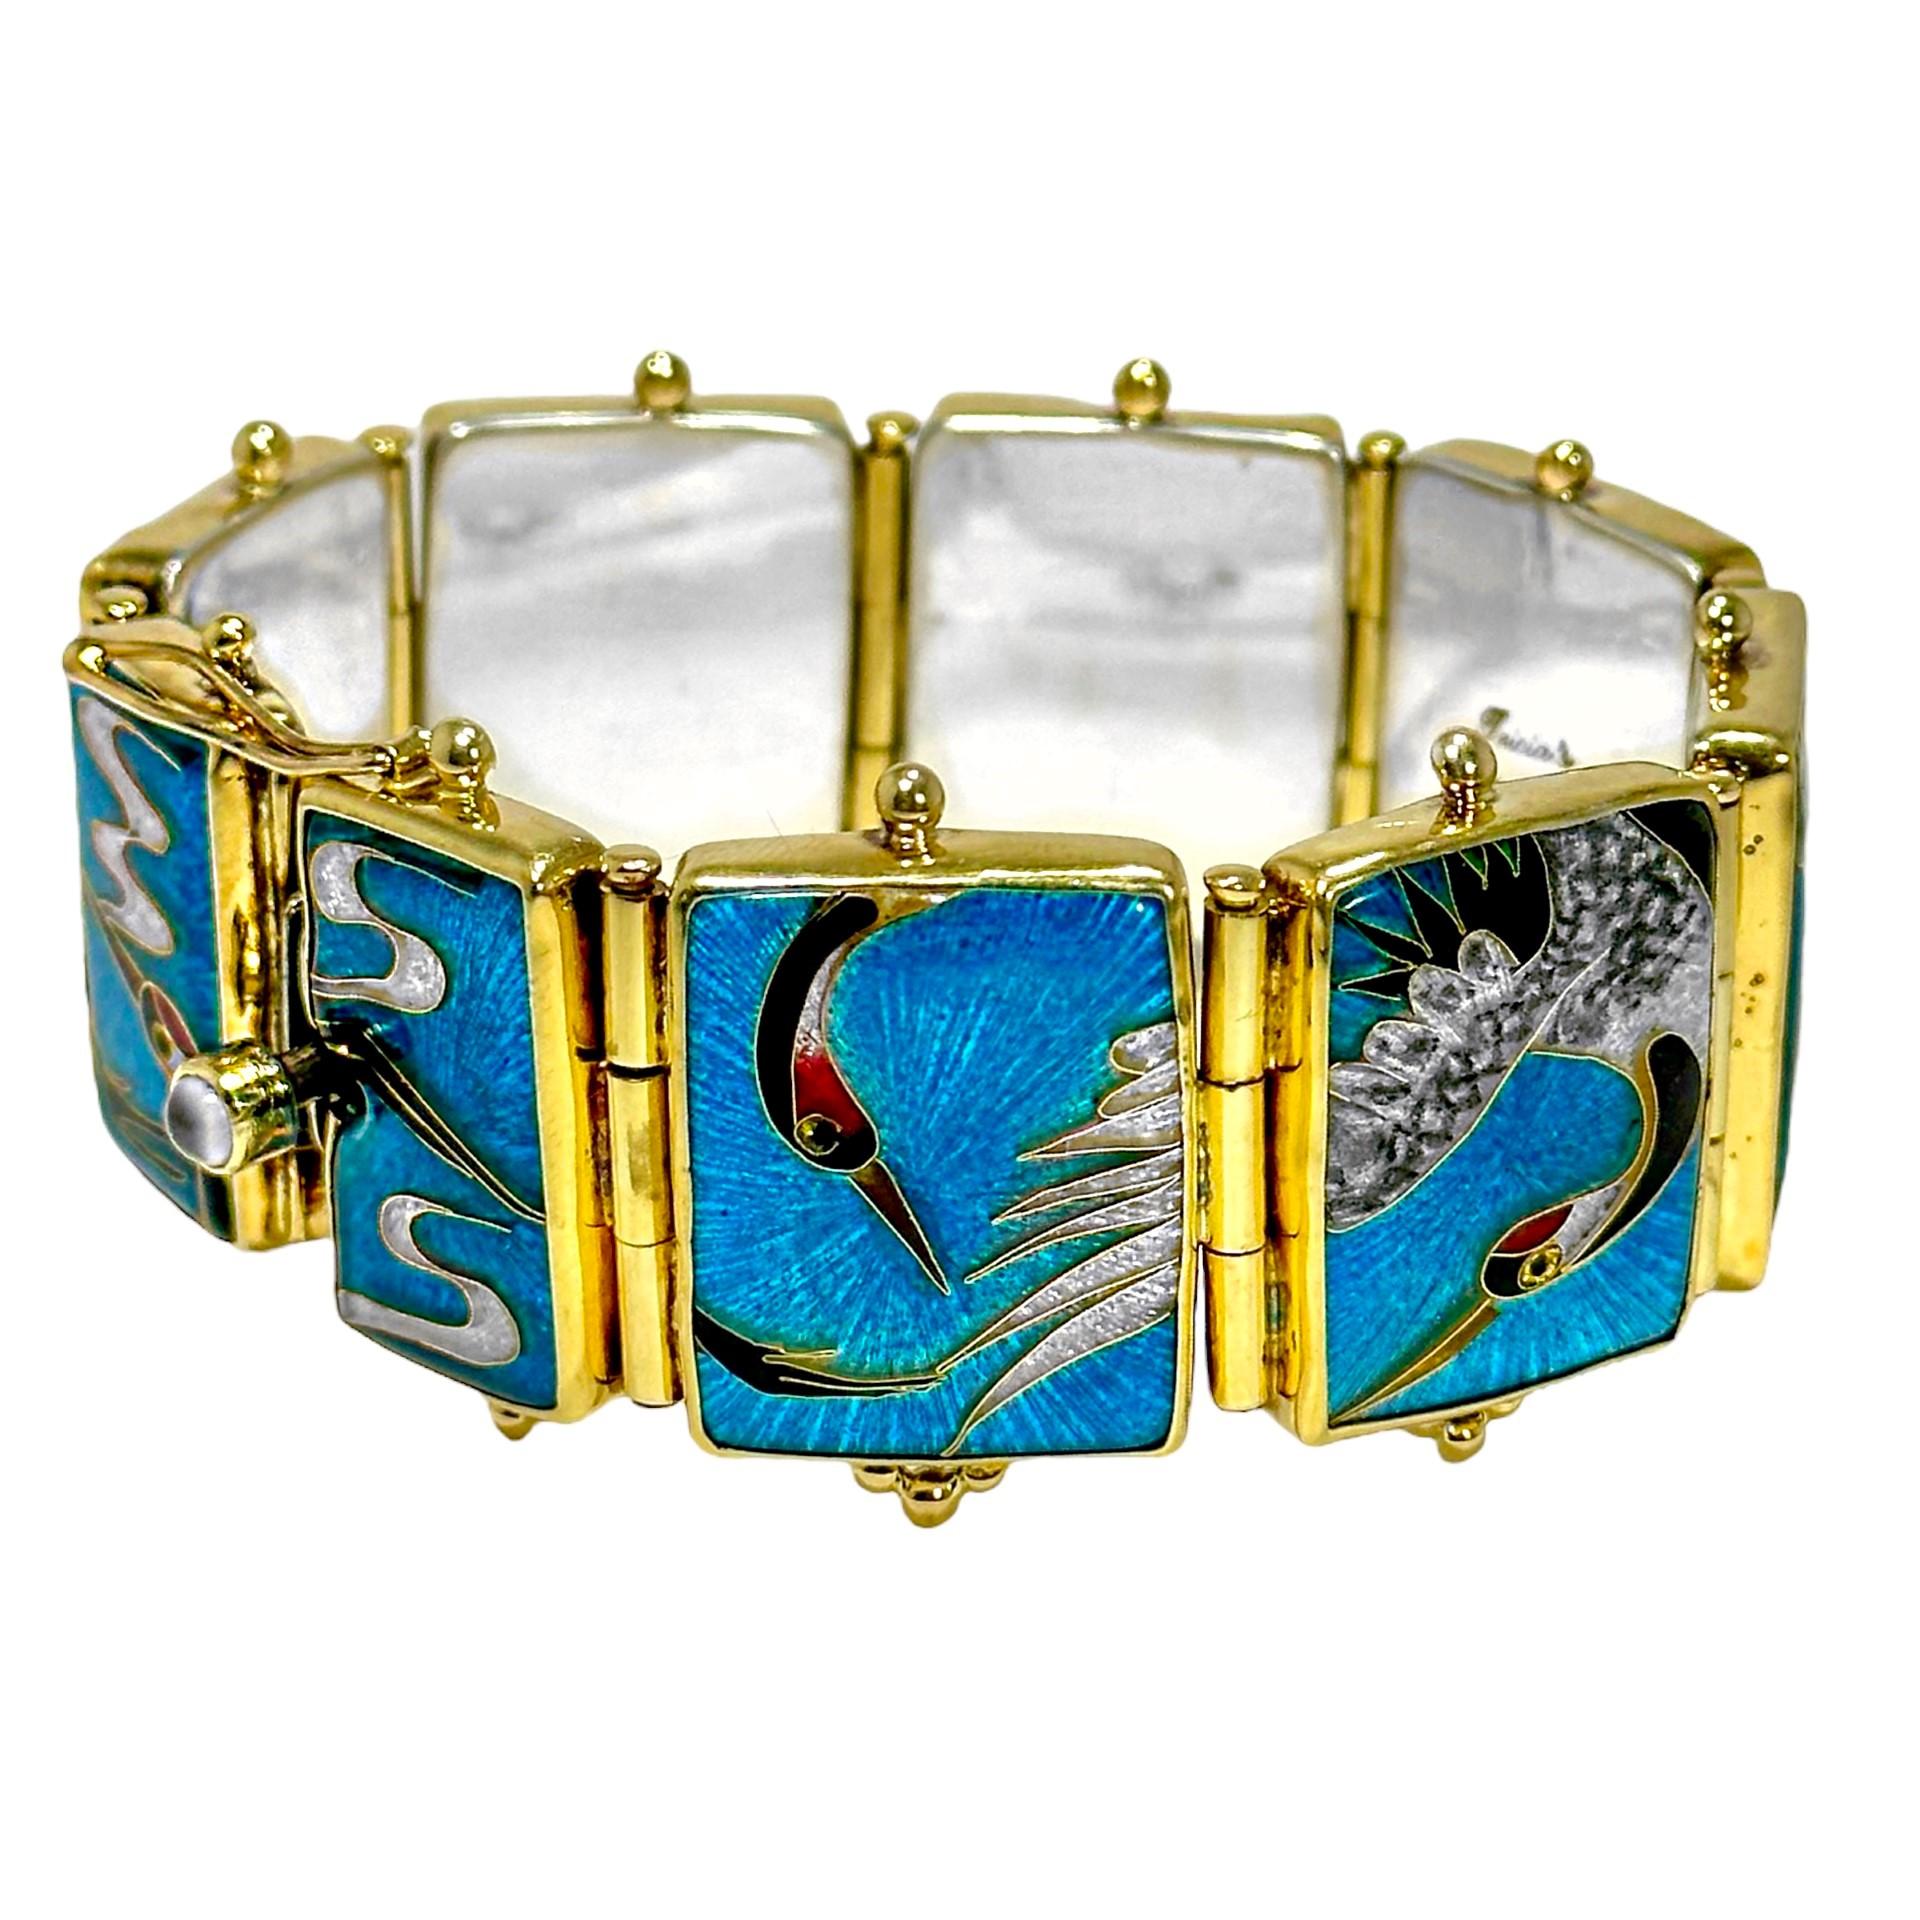 This truly spectacular early 21st-Century designer bracelet is made of 18k, 22k gold, and sterling silver. It is a vibrant, imaginative, and very well executed example of absolutely top level cloisonne enamel artwork. Having nine panels artfully